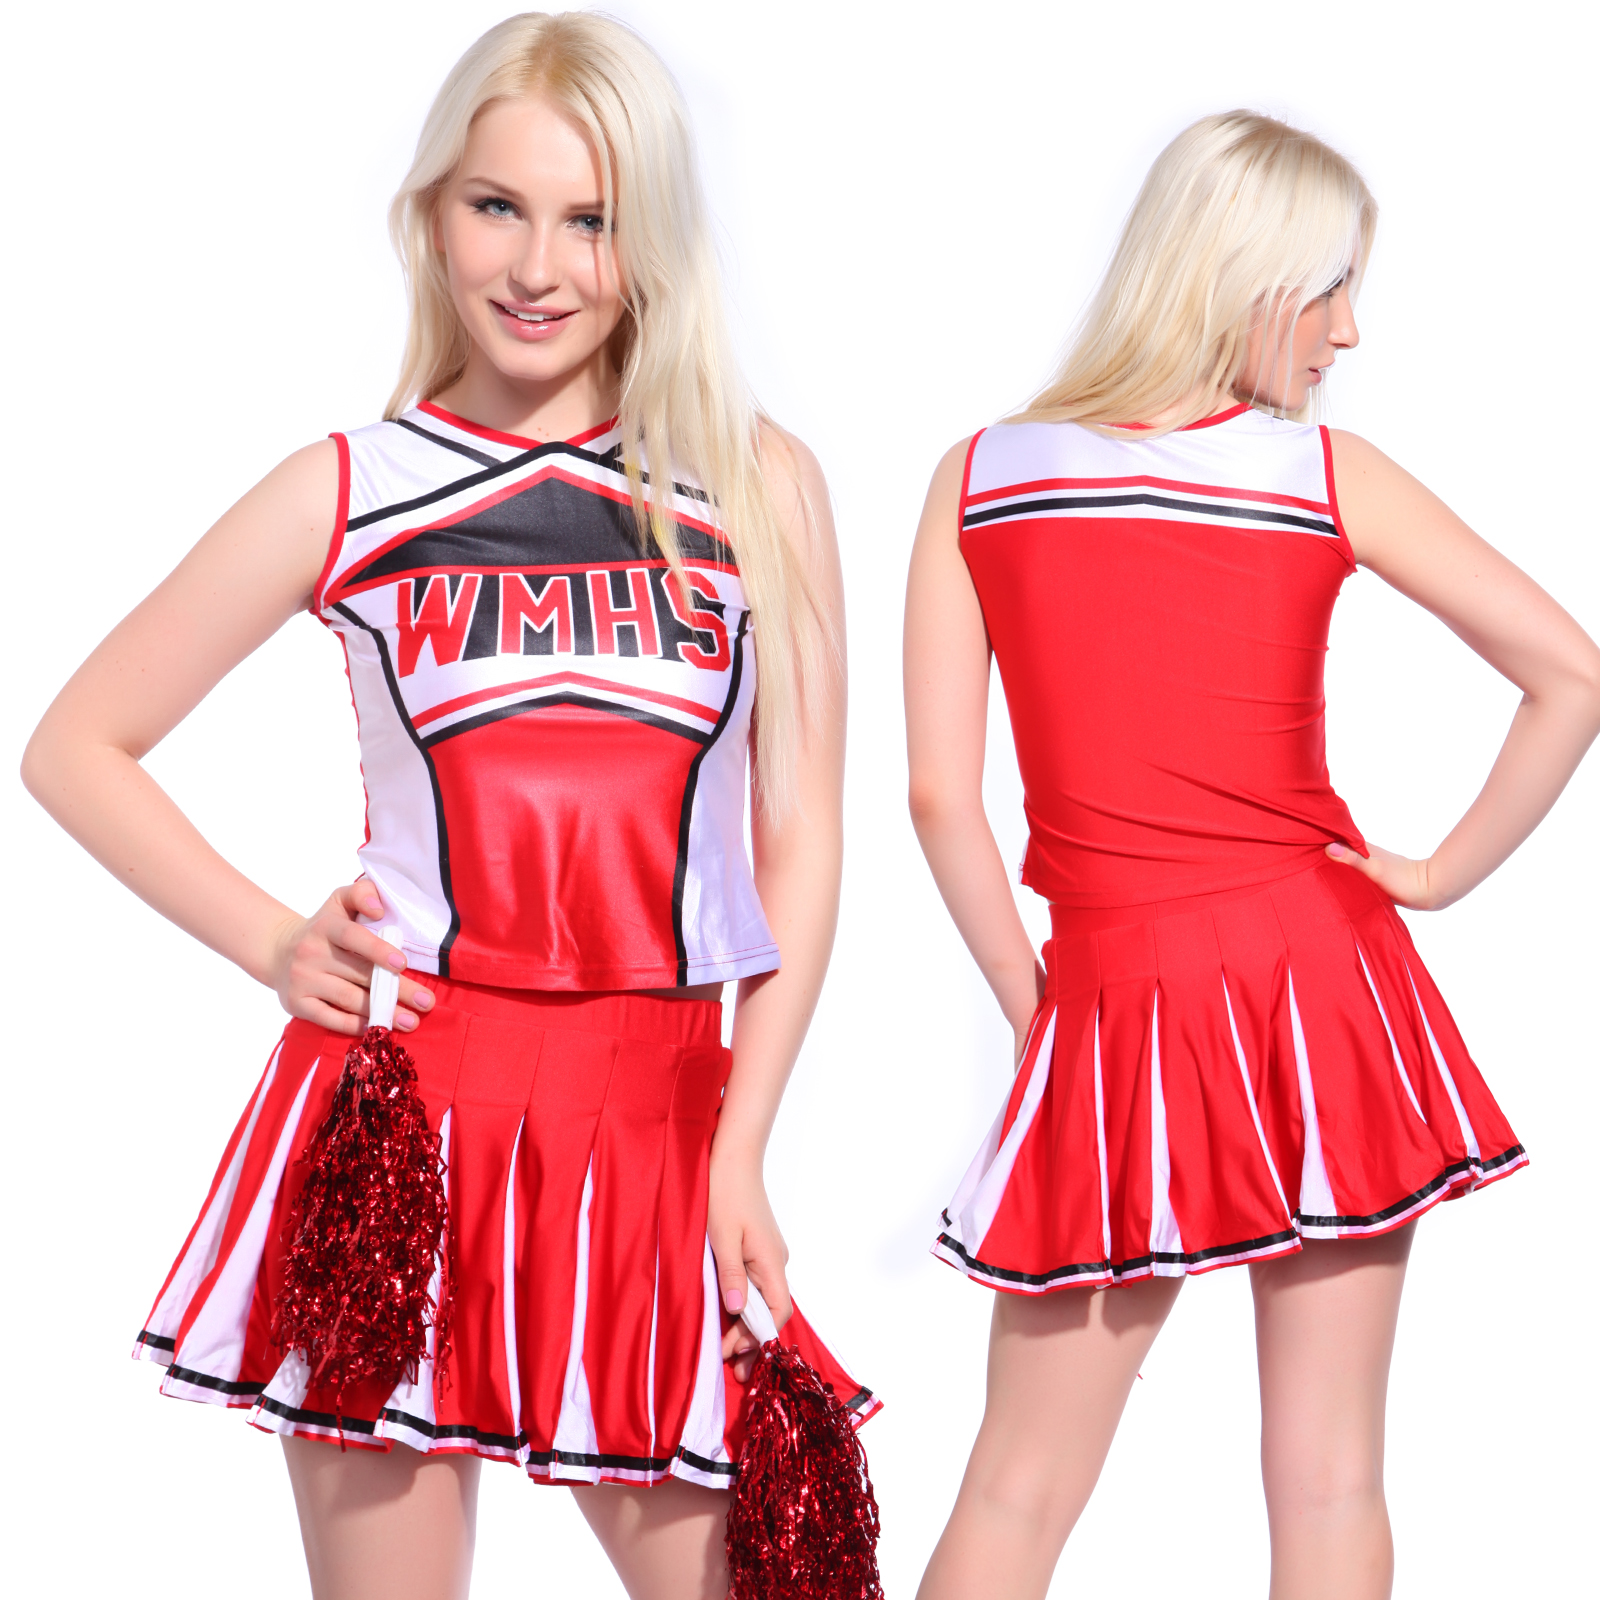 Glee Club Style Cheerios Cheer Girl Costume Adult Cheerleader Outfit Poms New Ebay